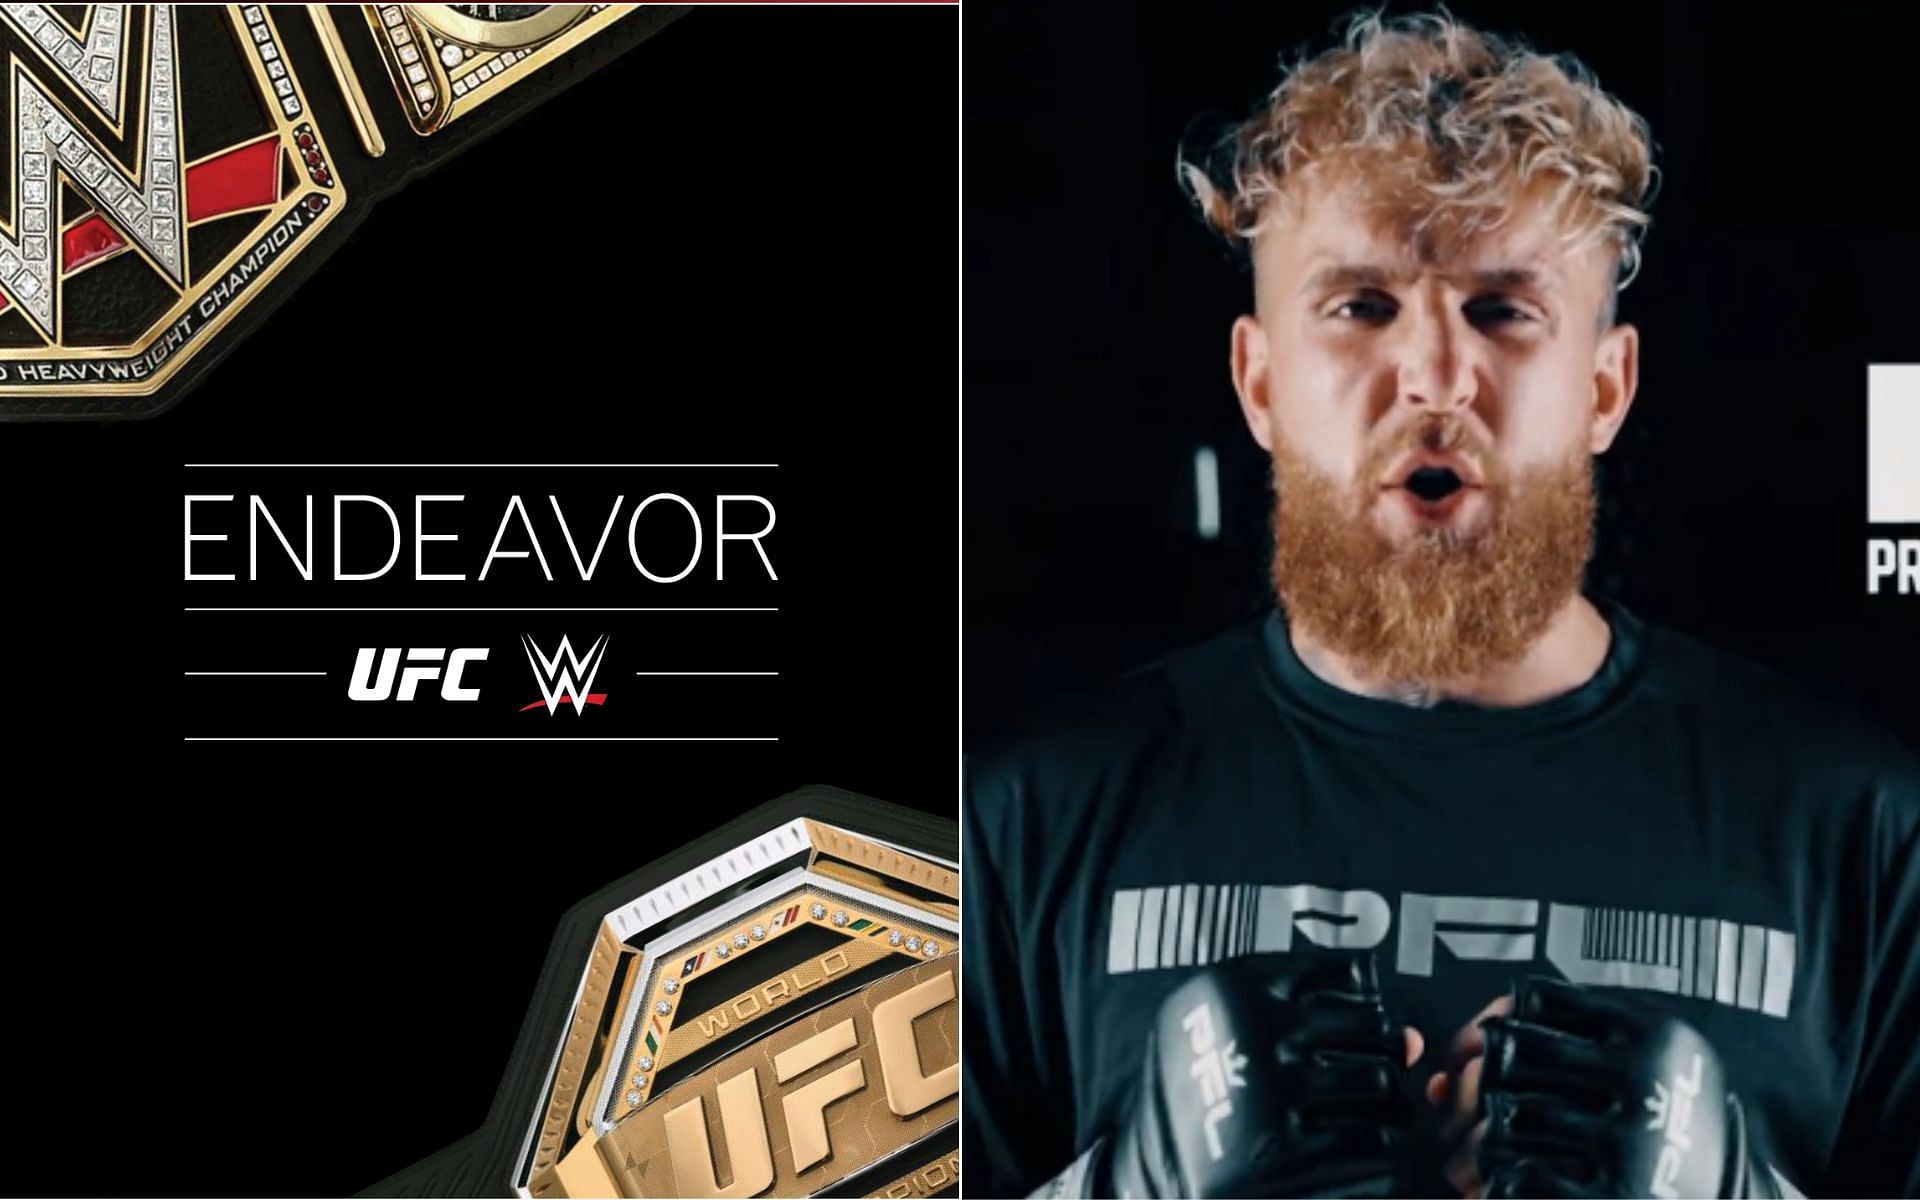 Endeavor announcing UFC-WWE merger [Left], and Jake Paul [Right] [Photo credit: @Endeavor and @PFLMMA - Twitter]